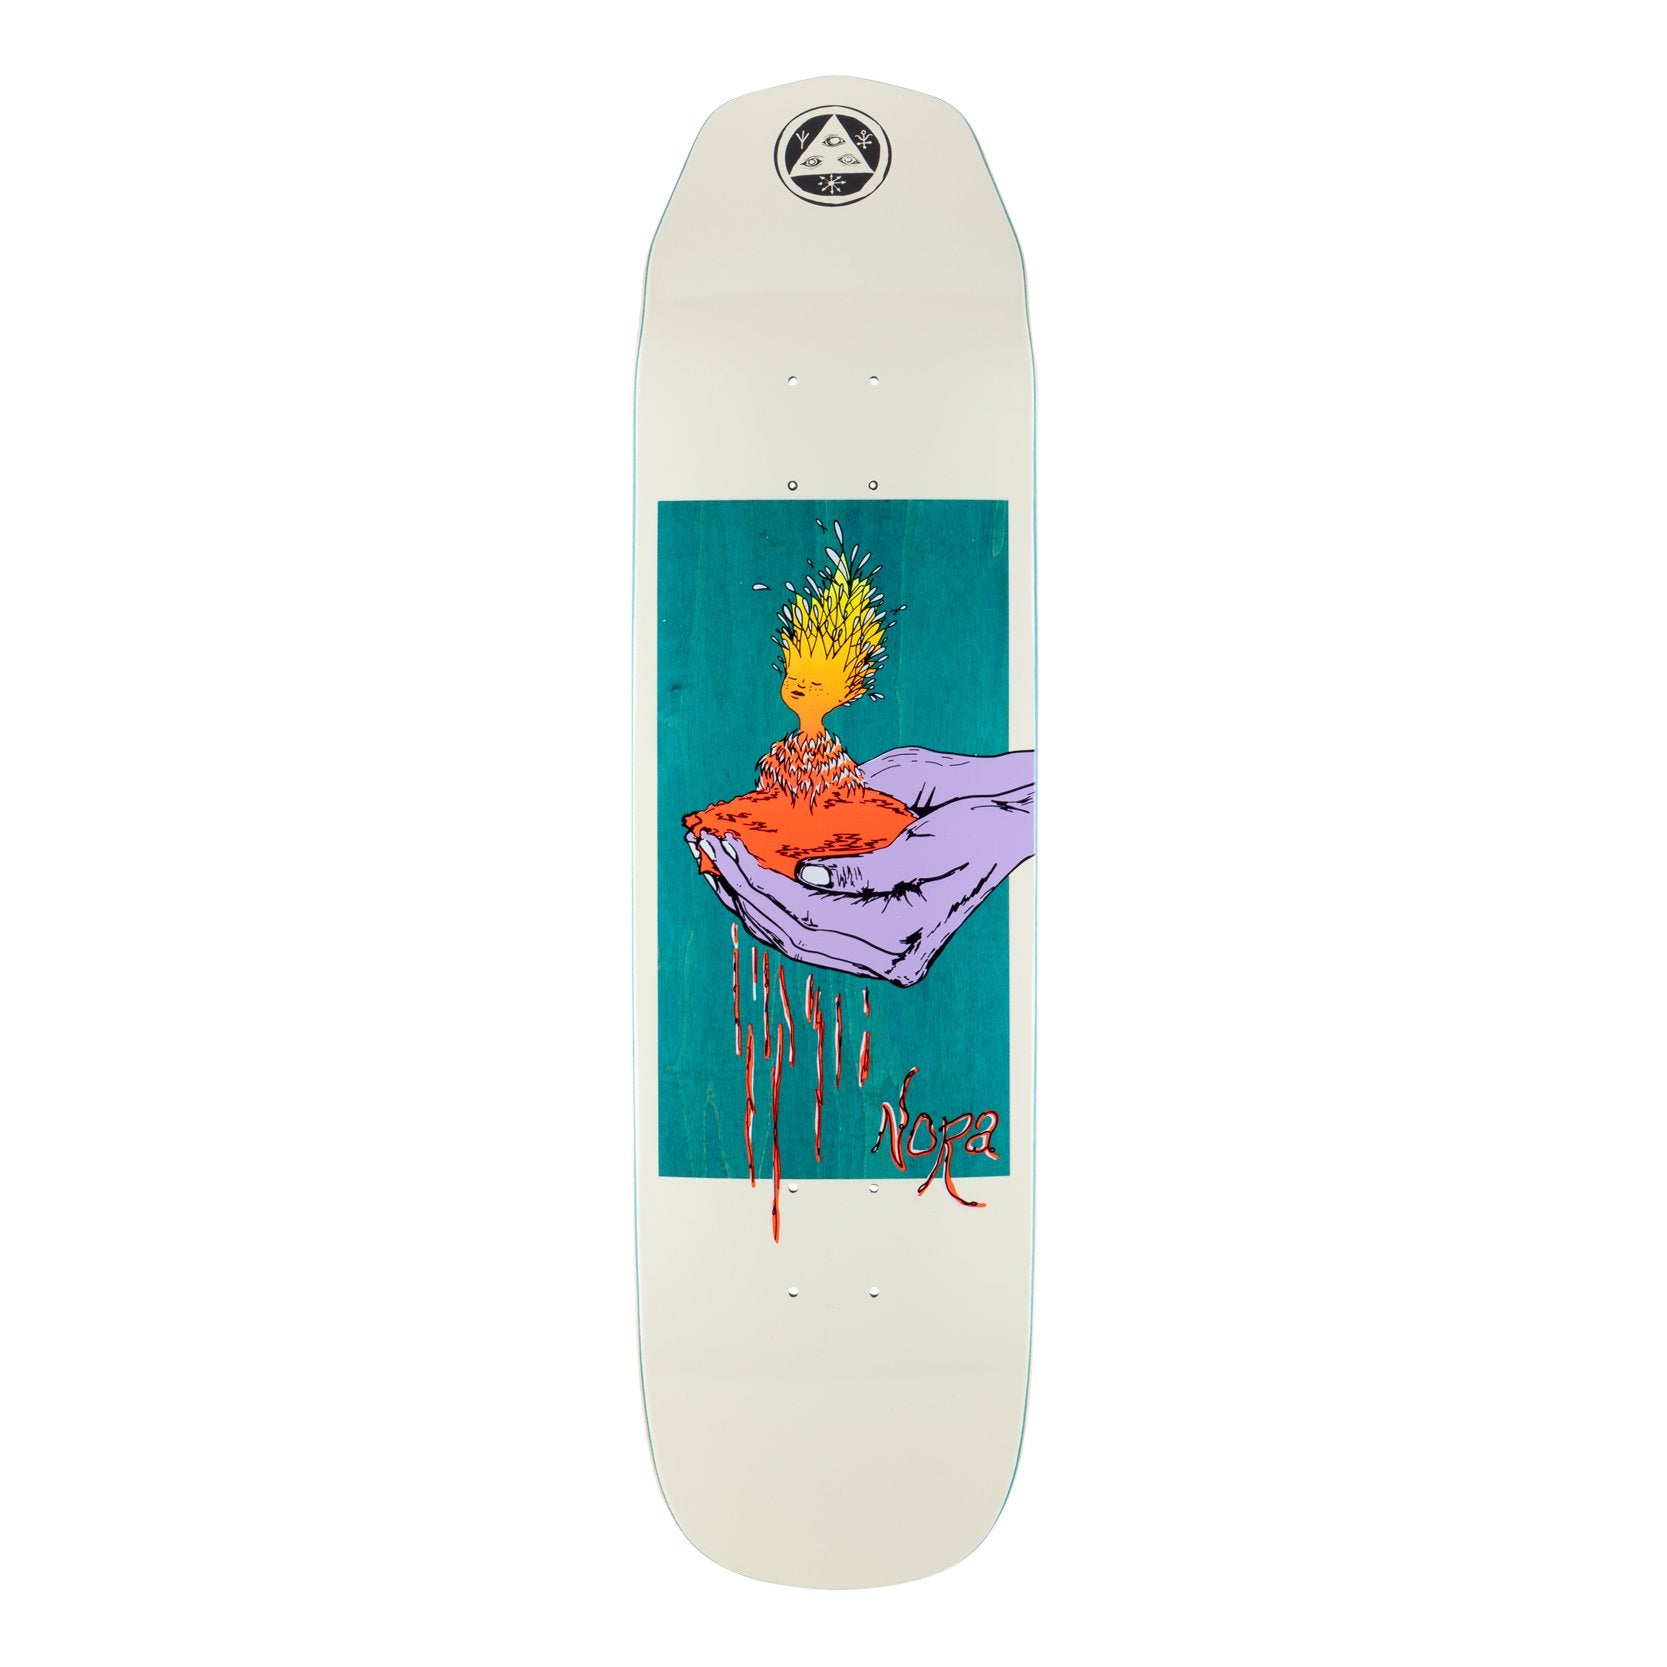 Nora Vasconcellos Soil On Wicked Princess Welcome Skateboard Deck